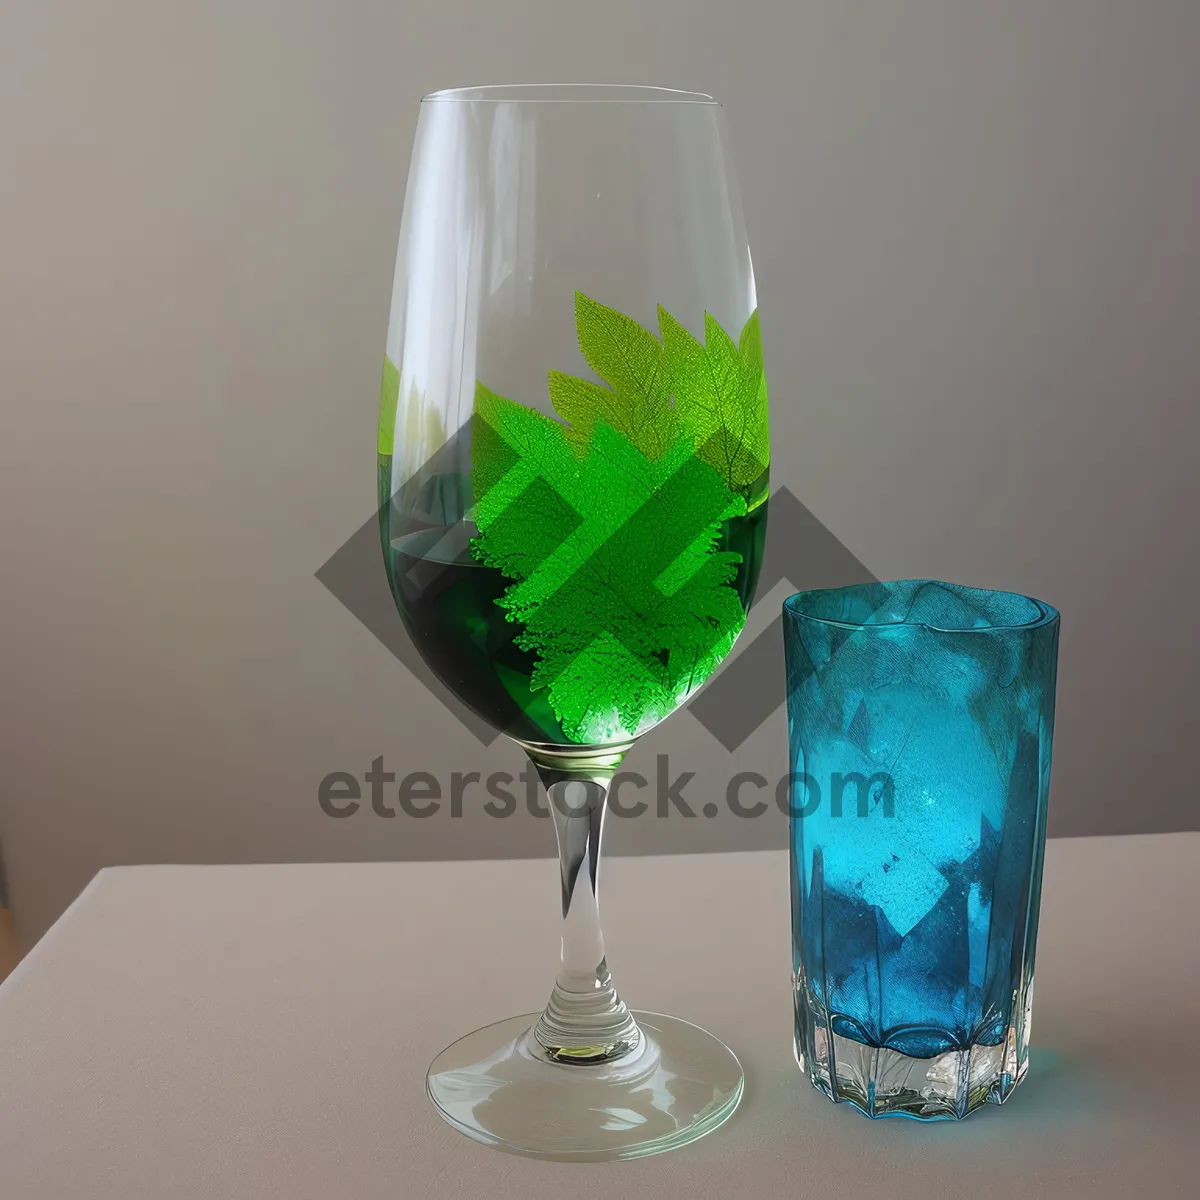 Picture of Vibrant Wineglass Cheers at Party Table